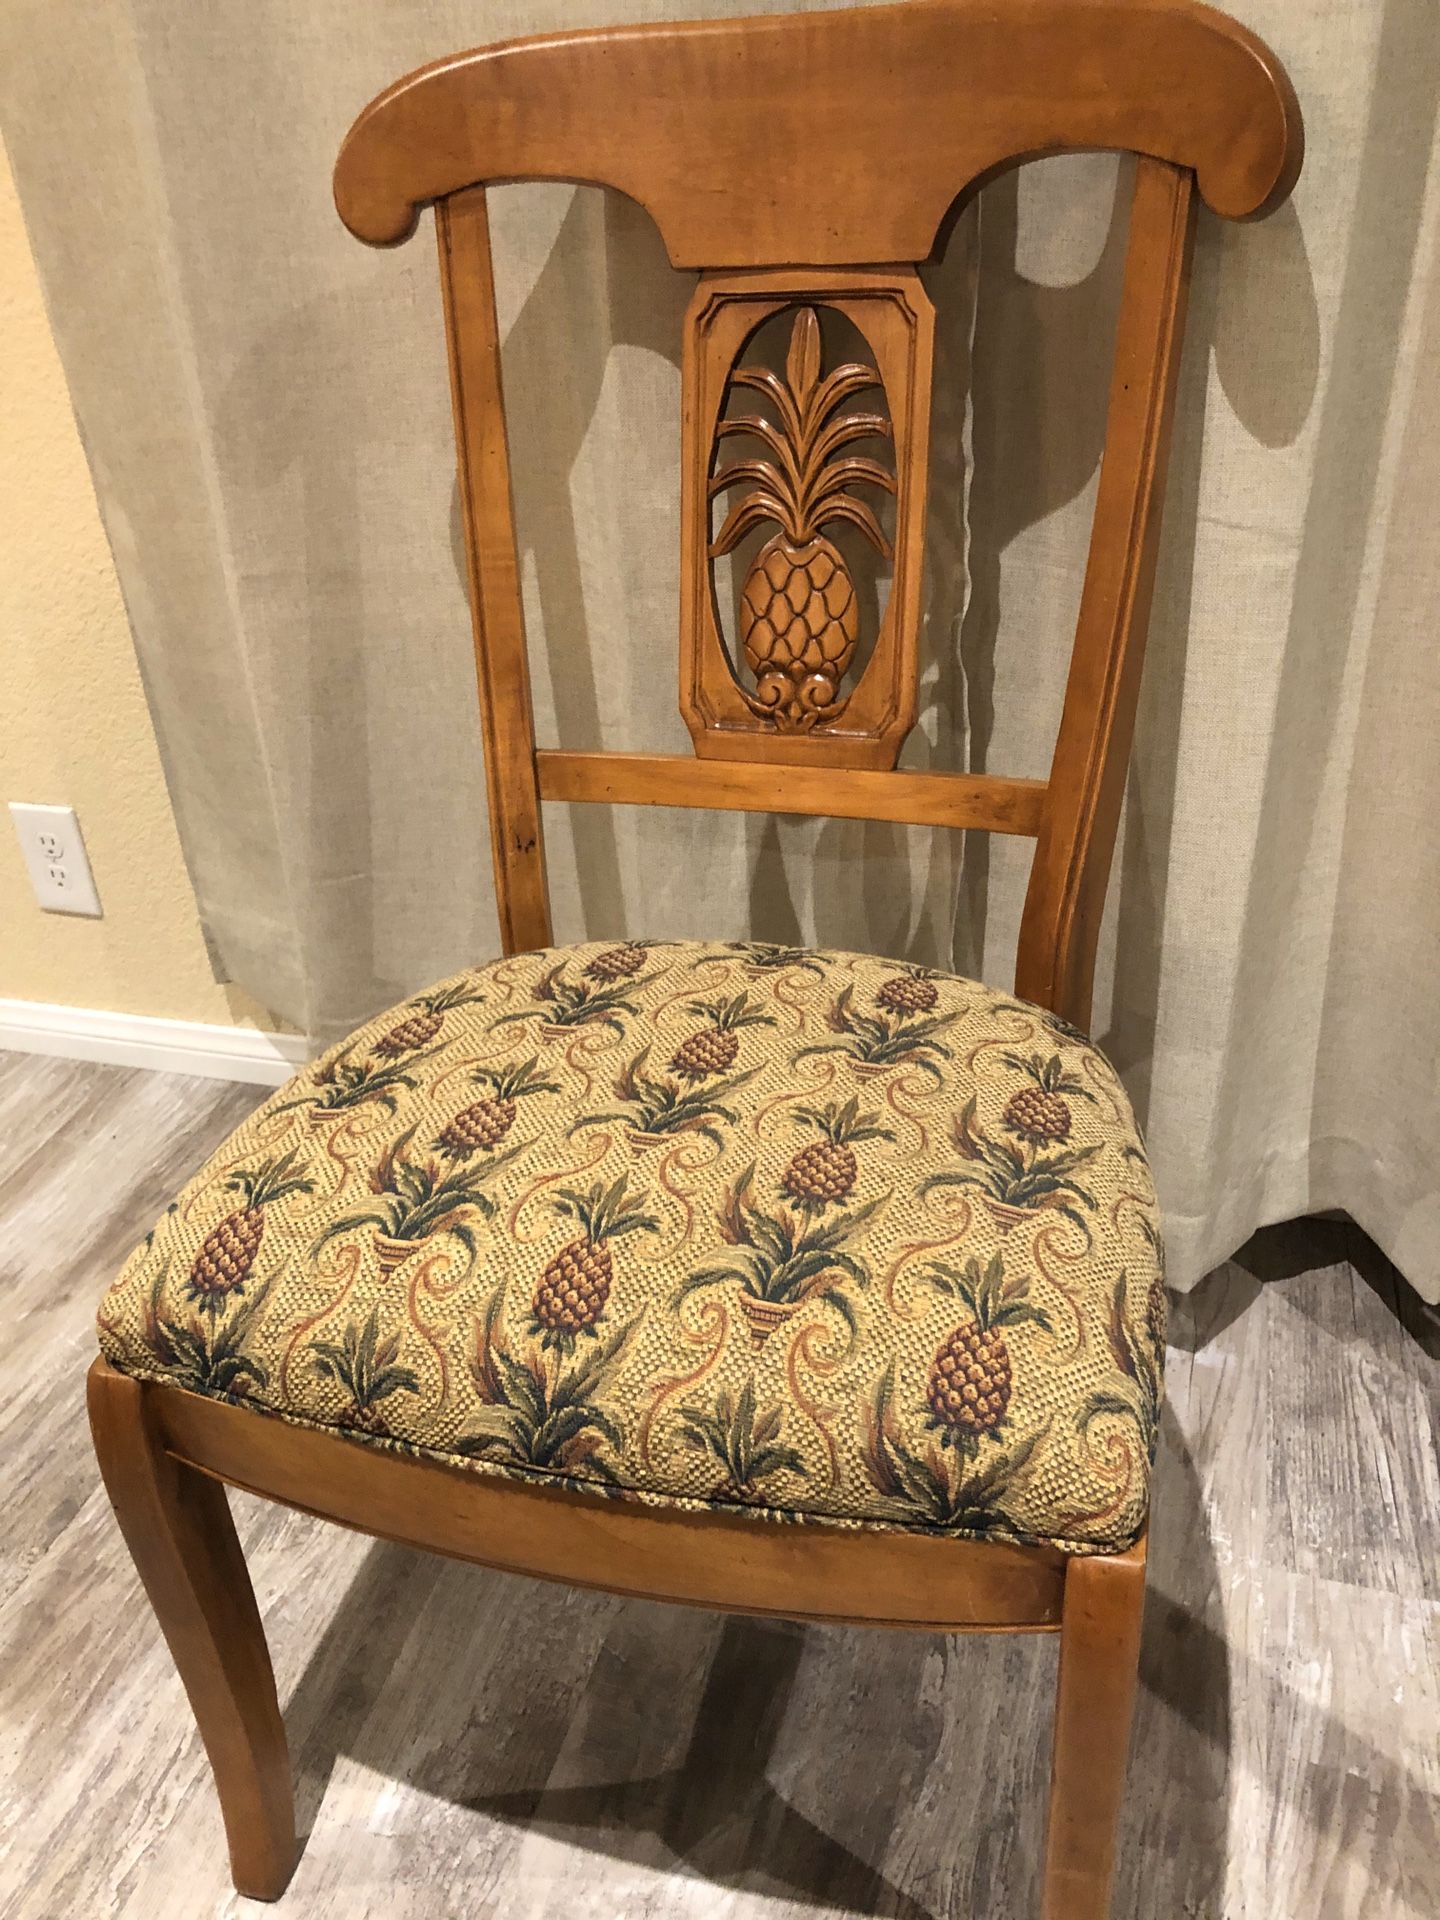 Ethan Allen legacy collection dining chairs